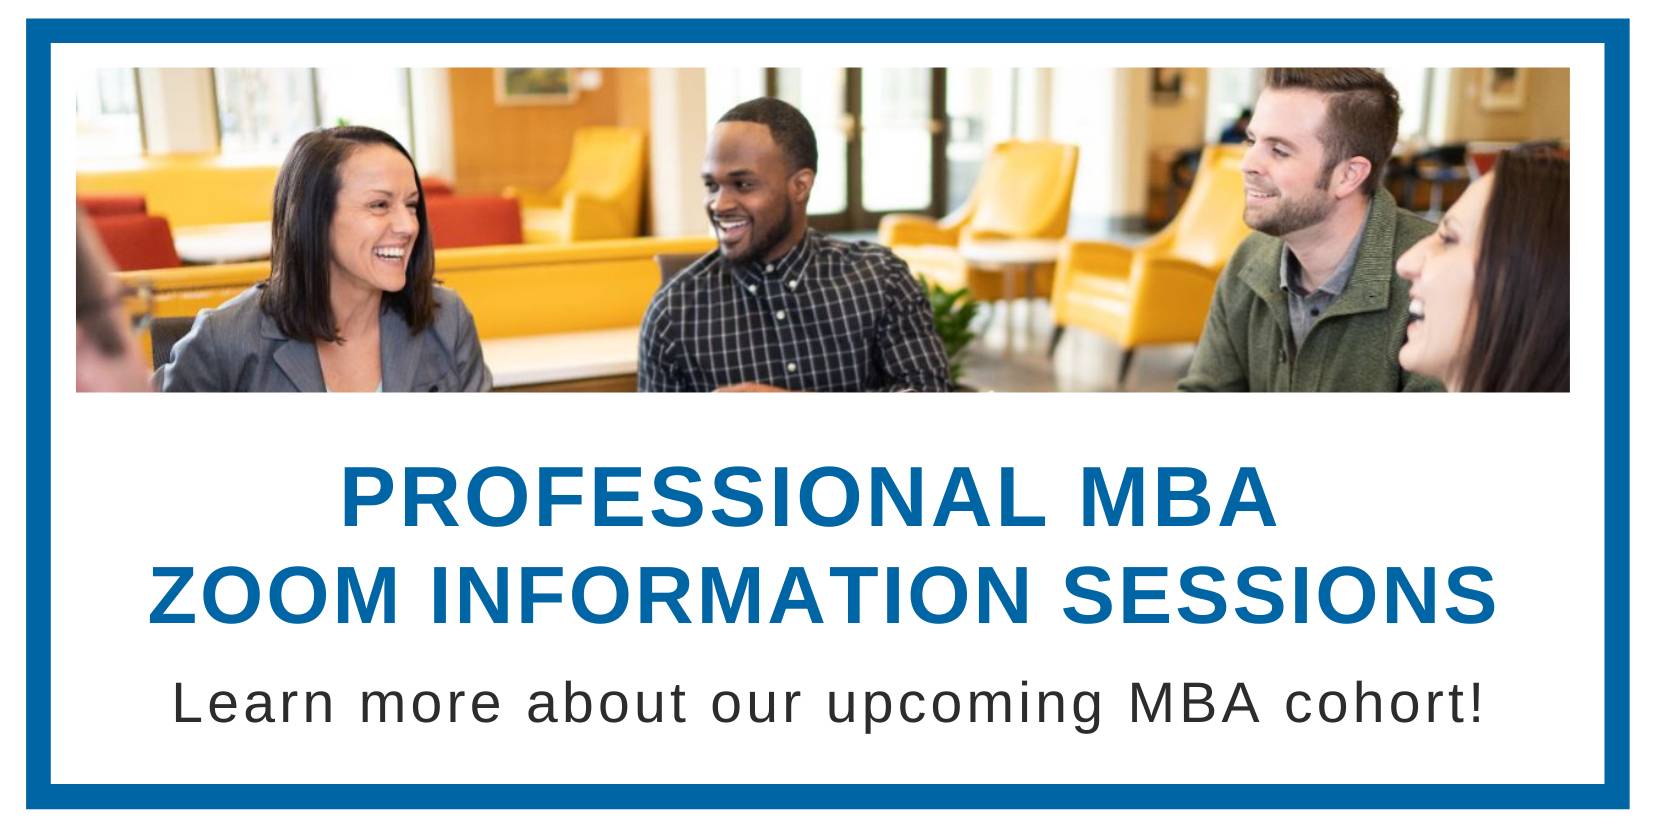 professional mba zoom information sessions; join us to learn about the upcoming cohort